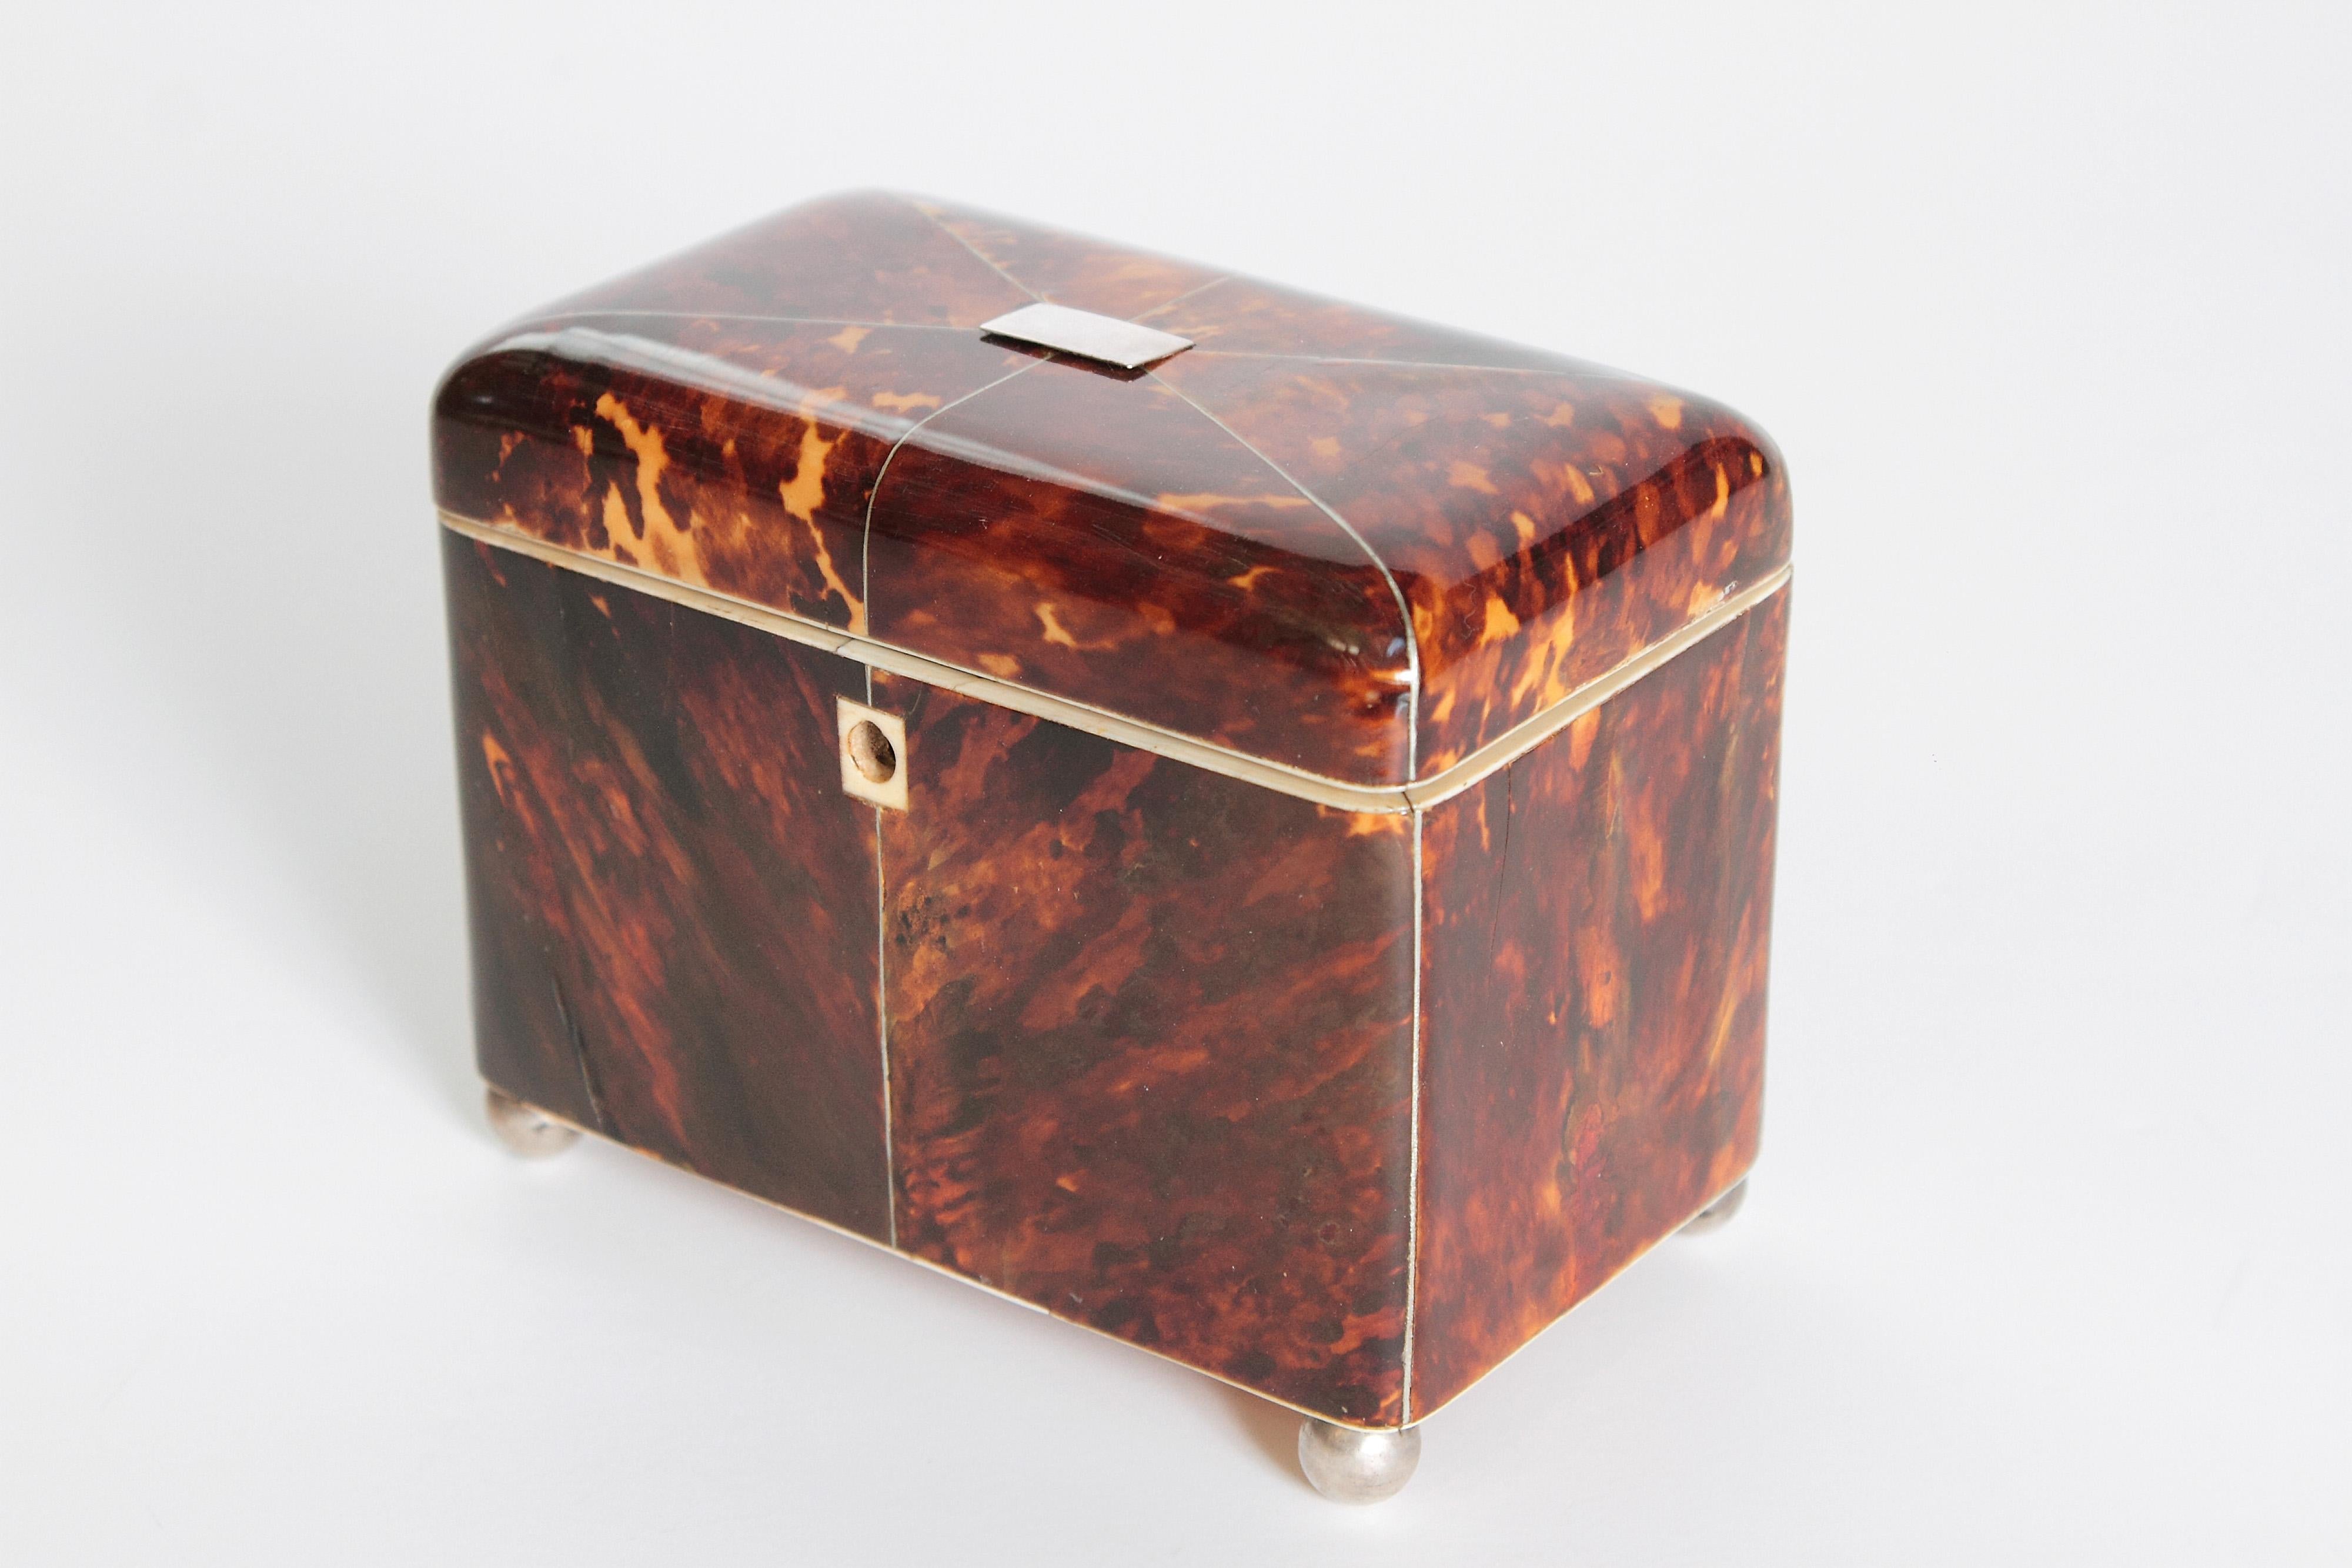 A early 19th century tortoiseshell rectangular tea caddy with a slightly domed lid. There is a pewter or silver central plaque on the lid and bone stringing around the opening. The interior contains two tortoiseshell lids with bone knobs and an